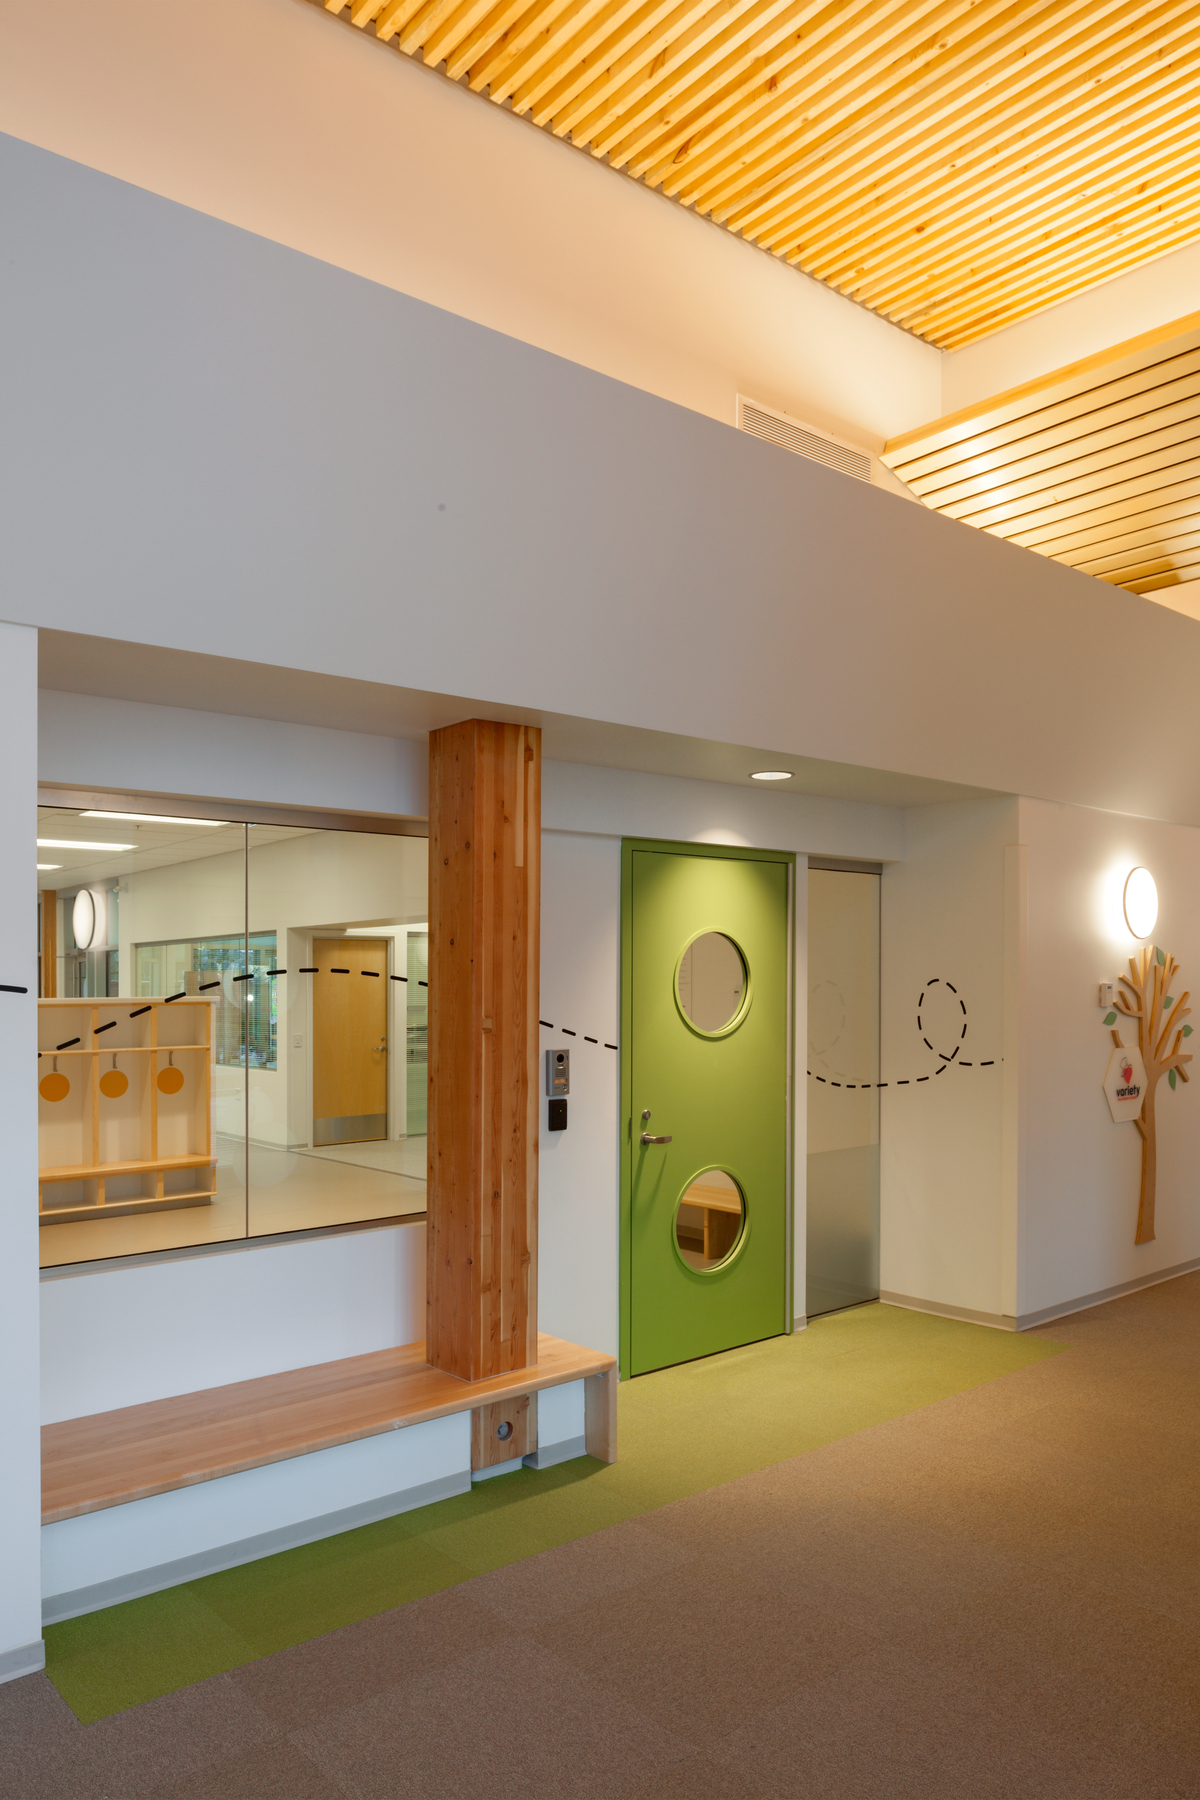 Bright sunny interior view of Pacific Autism Family Centre, showing colorful green interior door near glue-laminated timber (glulam) columns supporting dimensional lumber slat ceiling above